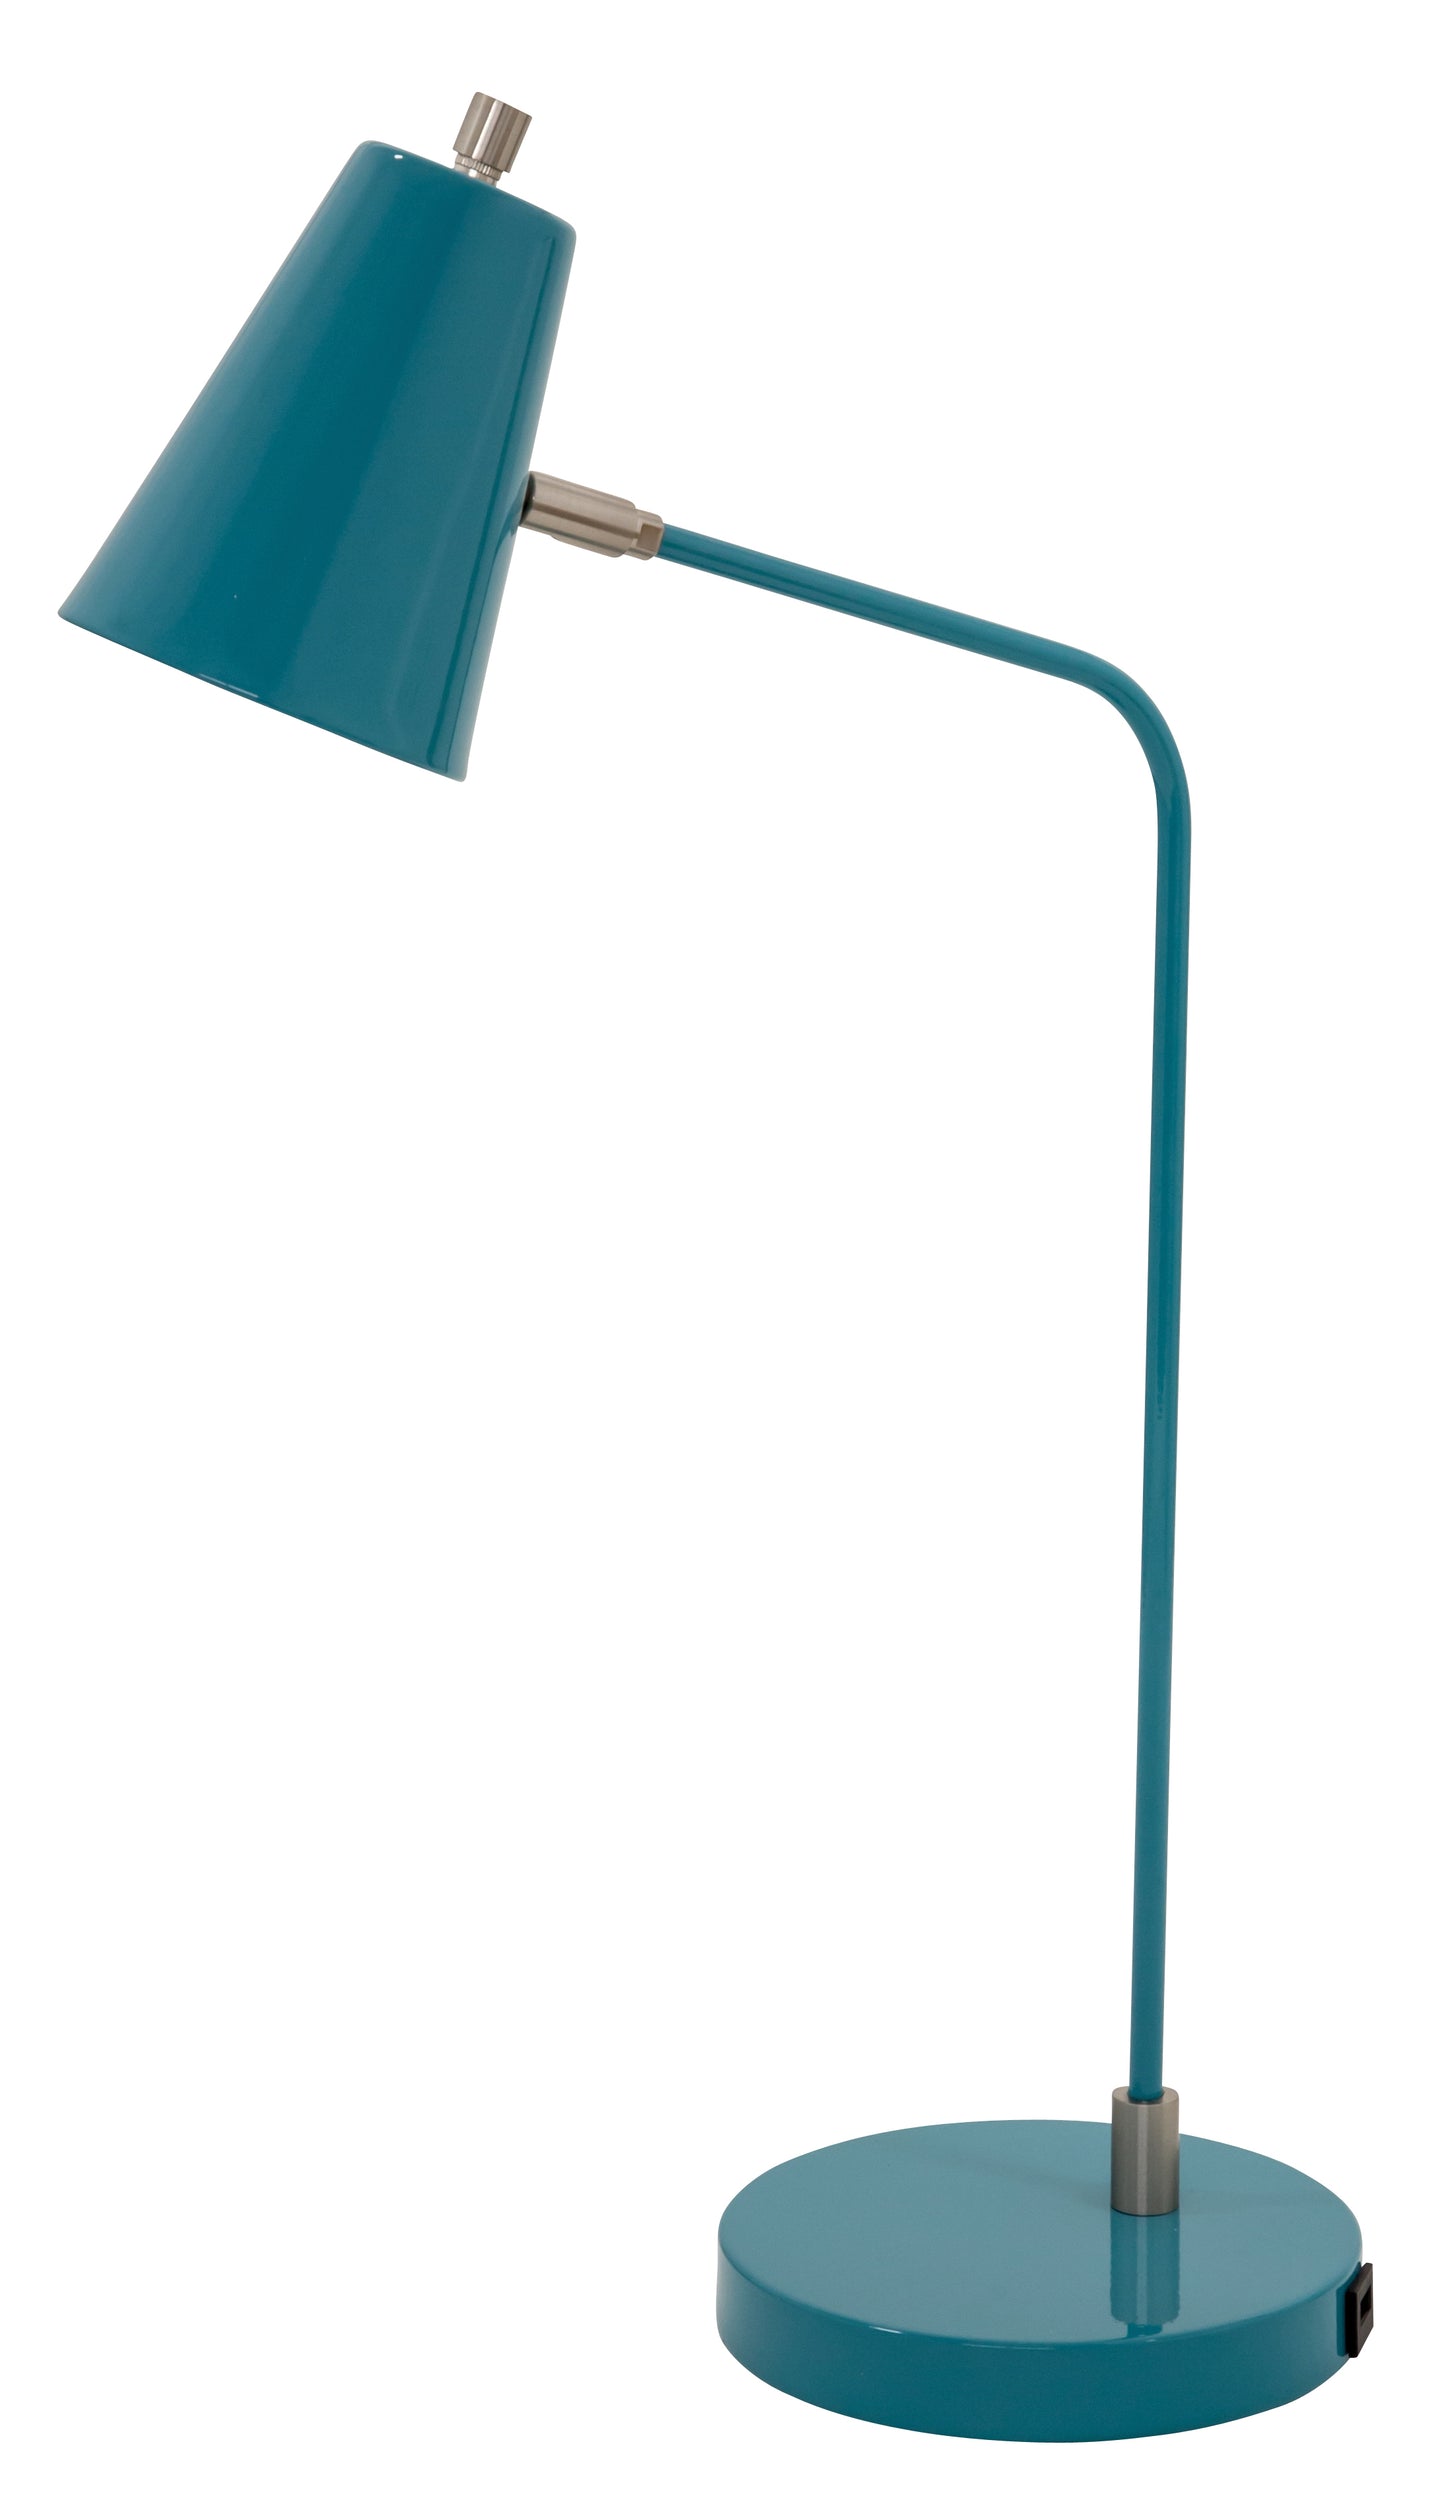 House of Troy Kirby LED Task Lamp Teal Satin Nickel Accents USB Port K150-TL